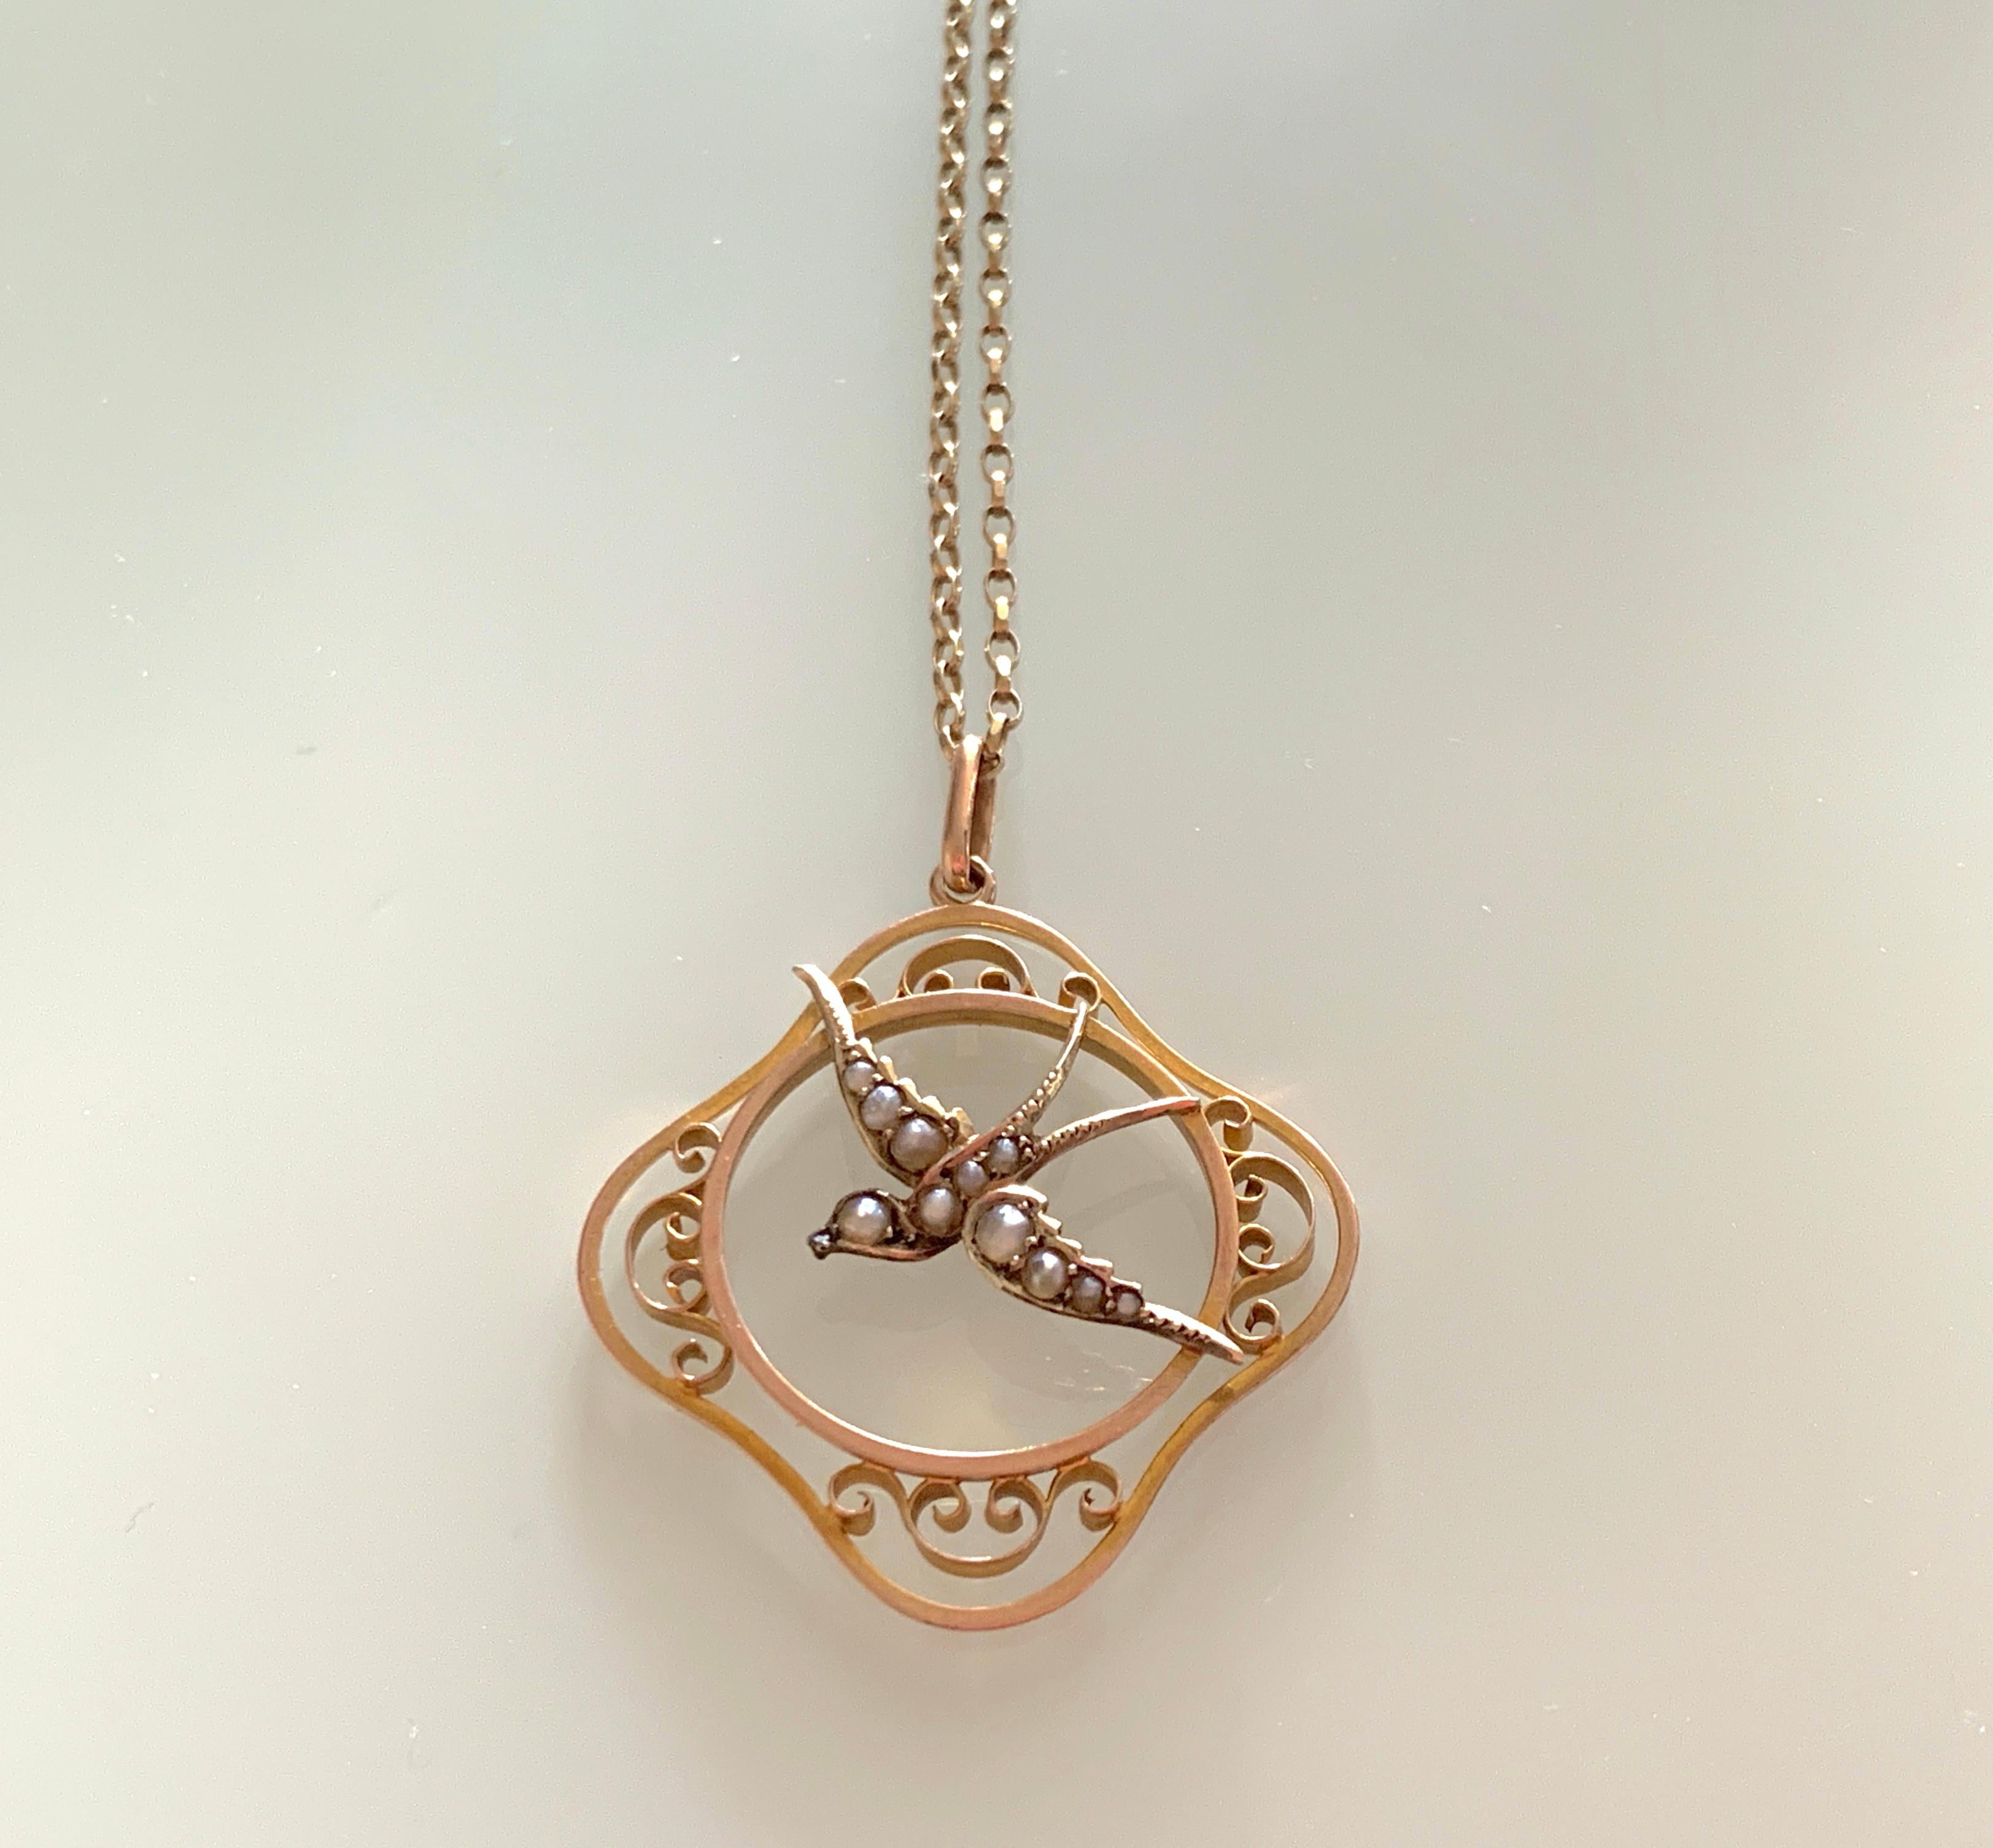 9ct Gold Antique Pendant
depicting a bird decorated with cultured seed pearls
Pendant is stamped 9ct on reverse
Pendant Size - 3.5 cm x 3.5cm
Pendant Weight - 2.65 grammes

9ct Gold Chain is fully Hallmarked
and is modern .
Chain weight 2.75